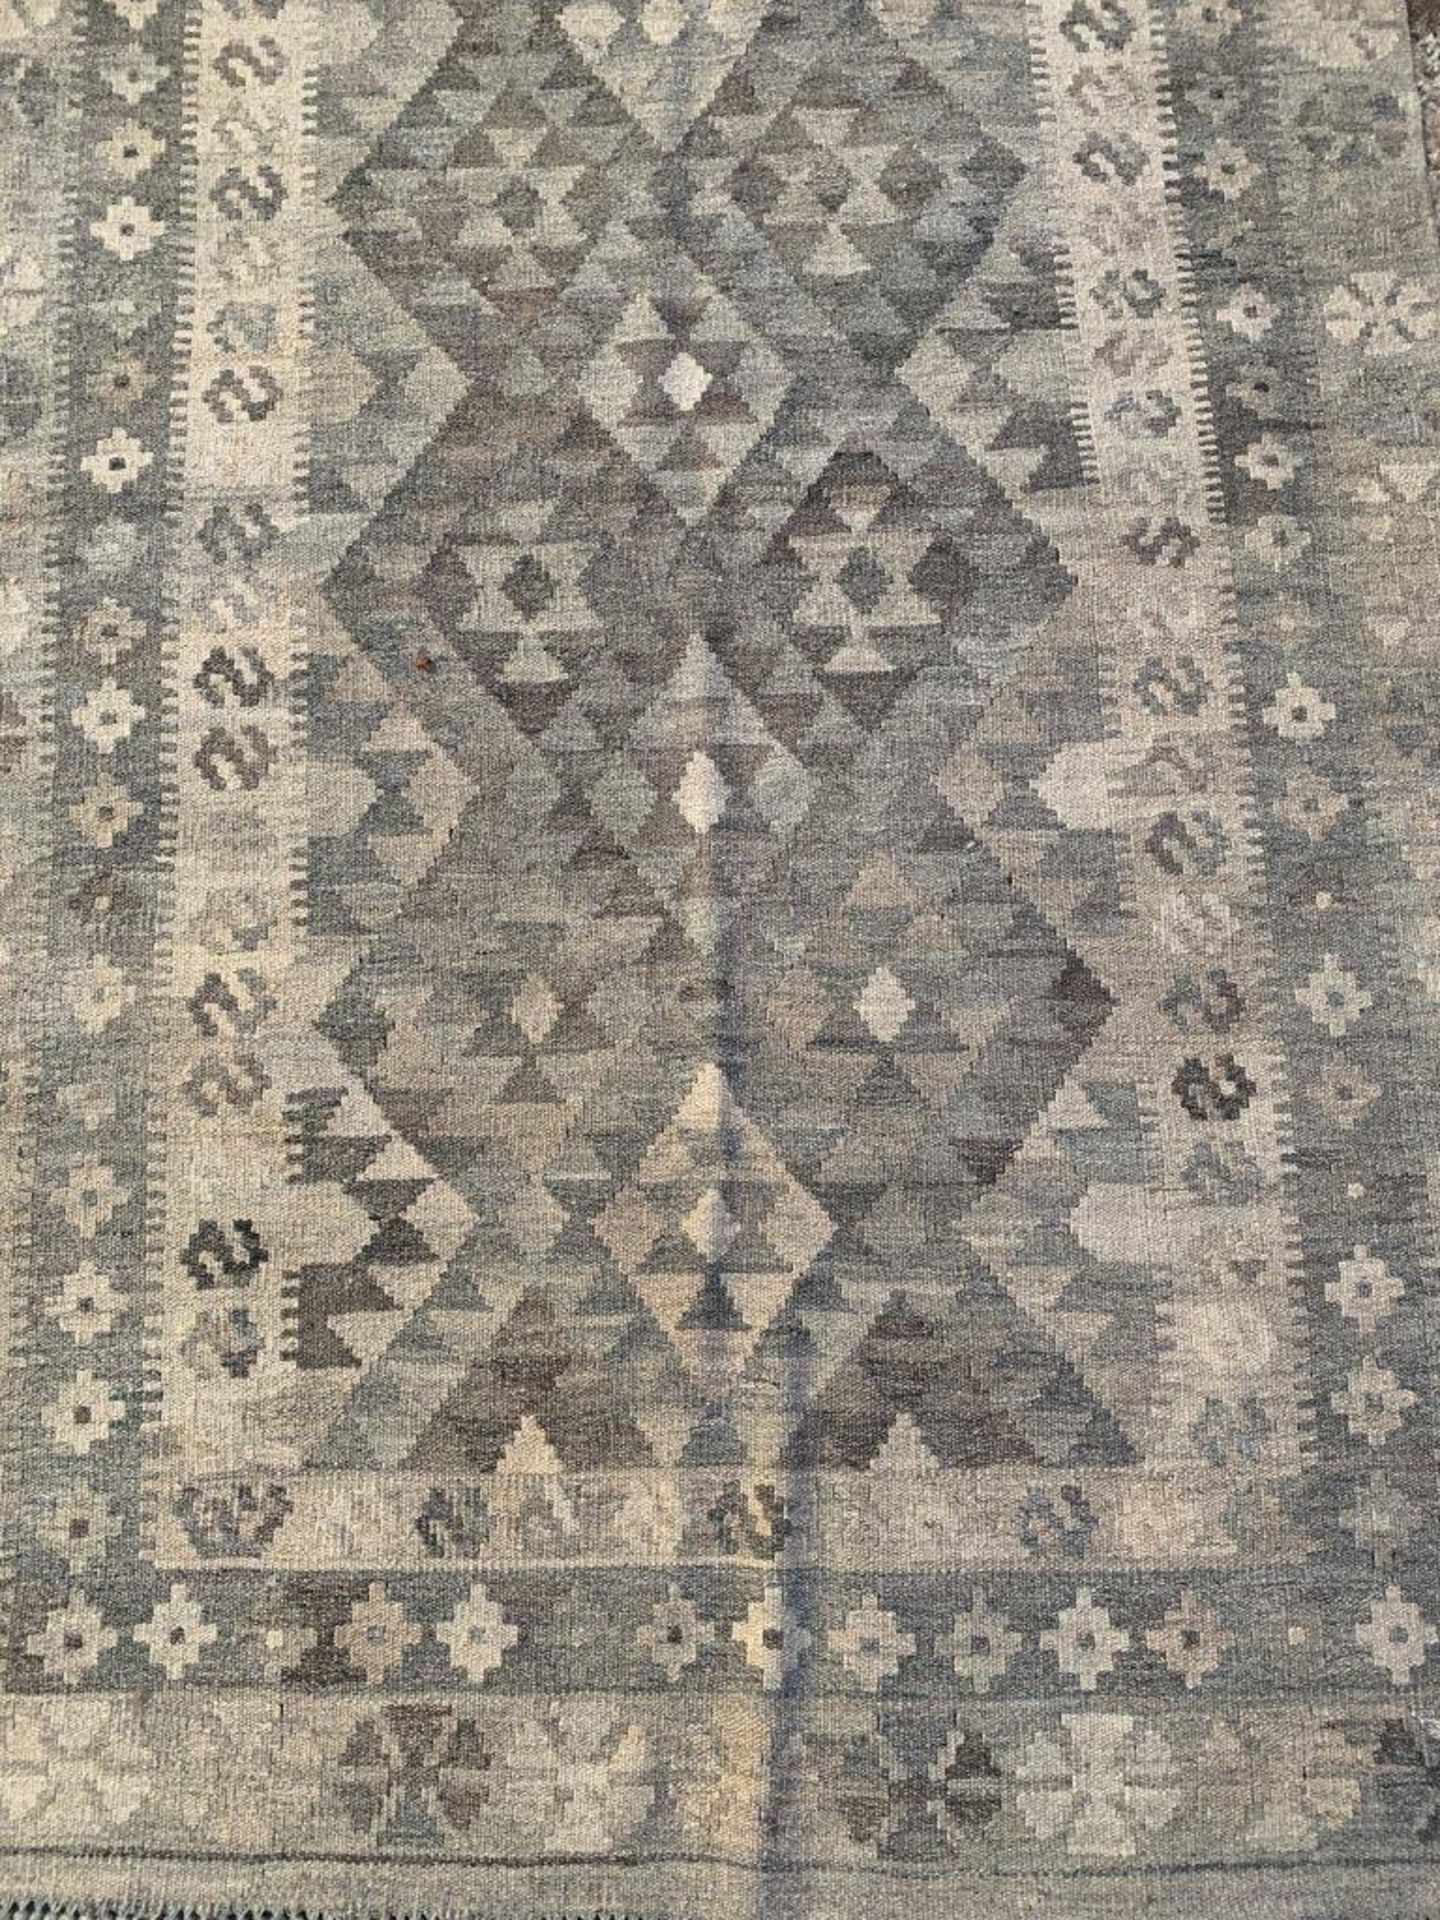 Two grey rugs - Image 2 of 6